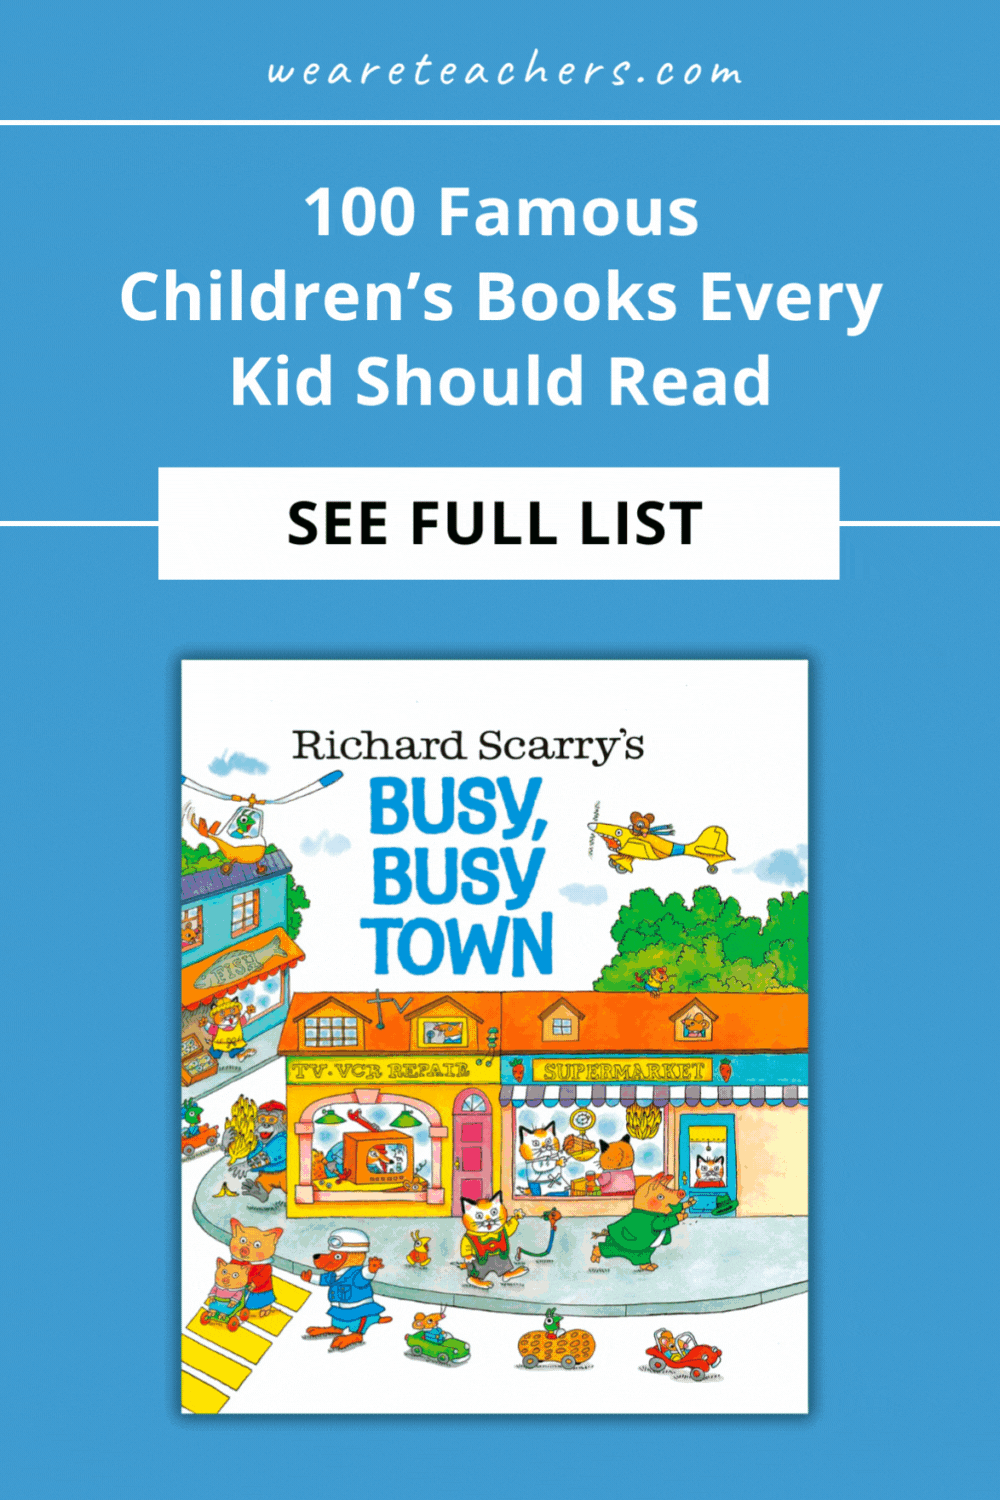 Share these 100 famous children's books with the kids in your life for a dose of nostalgia they are sure to enjoy!